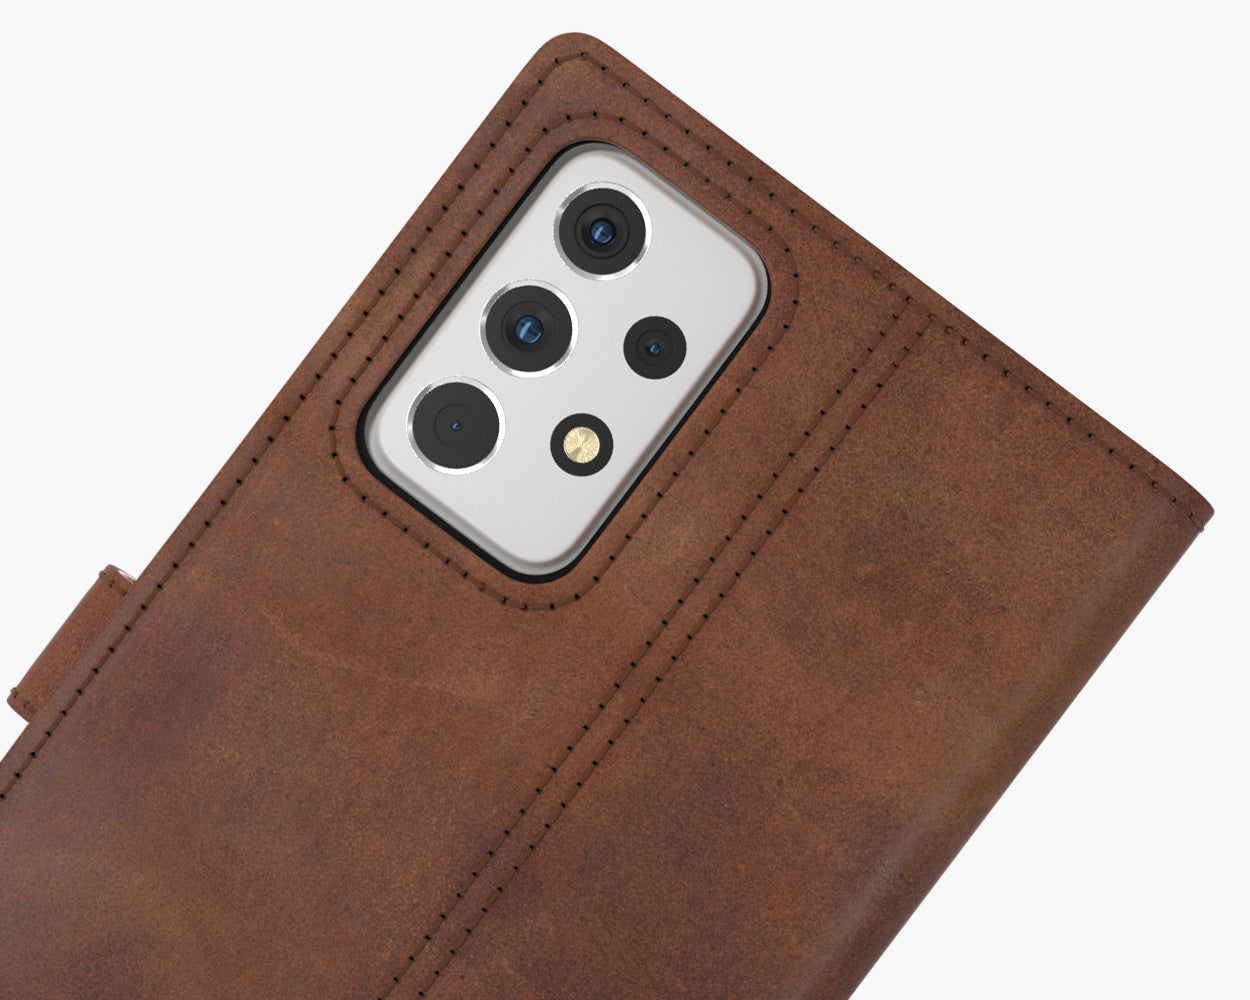 Vintage Leather Wallet - Samsung Galaxy A52/A52S